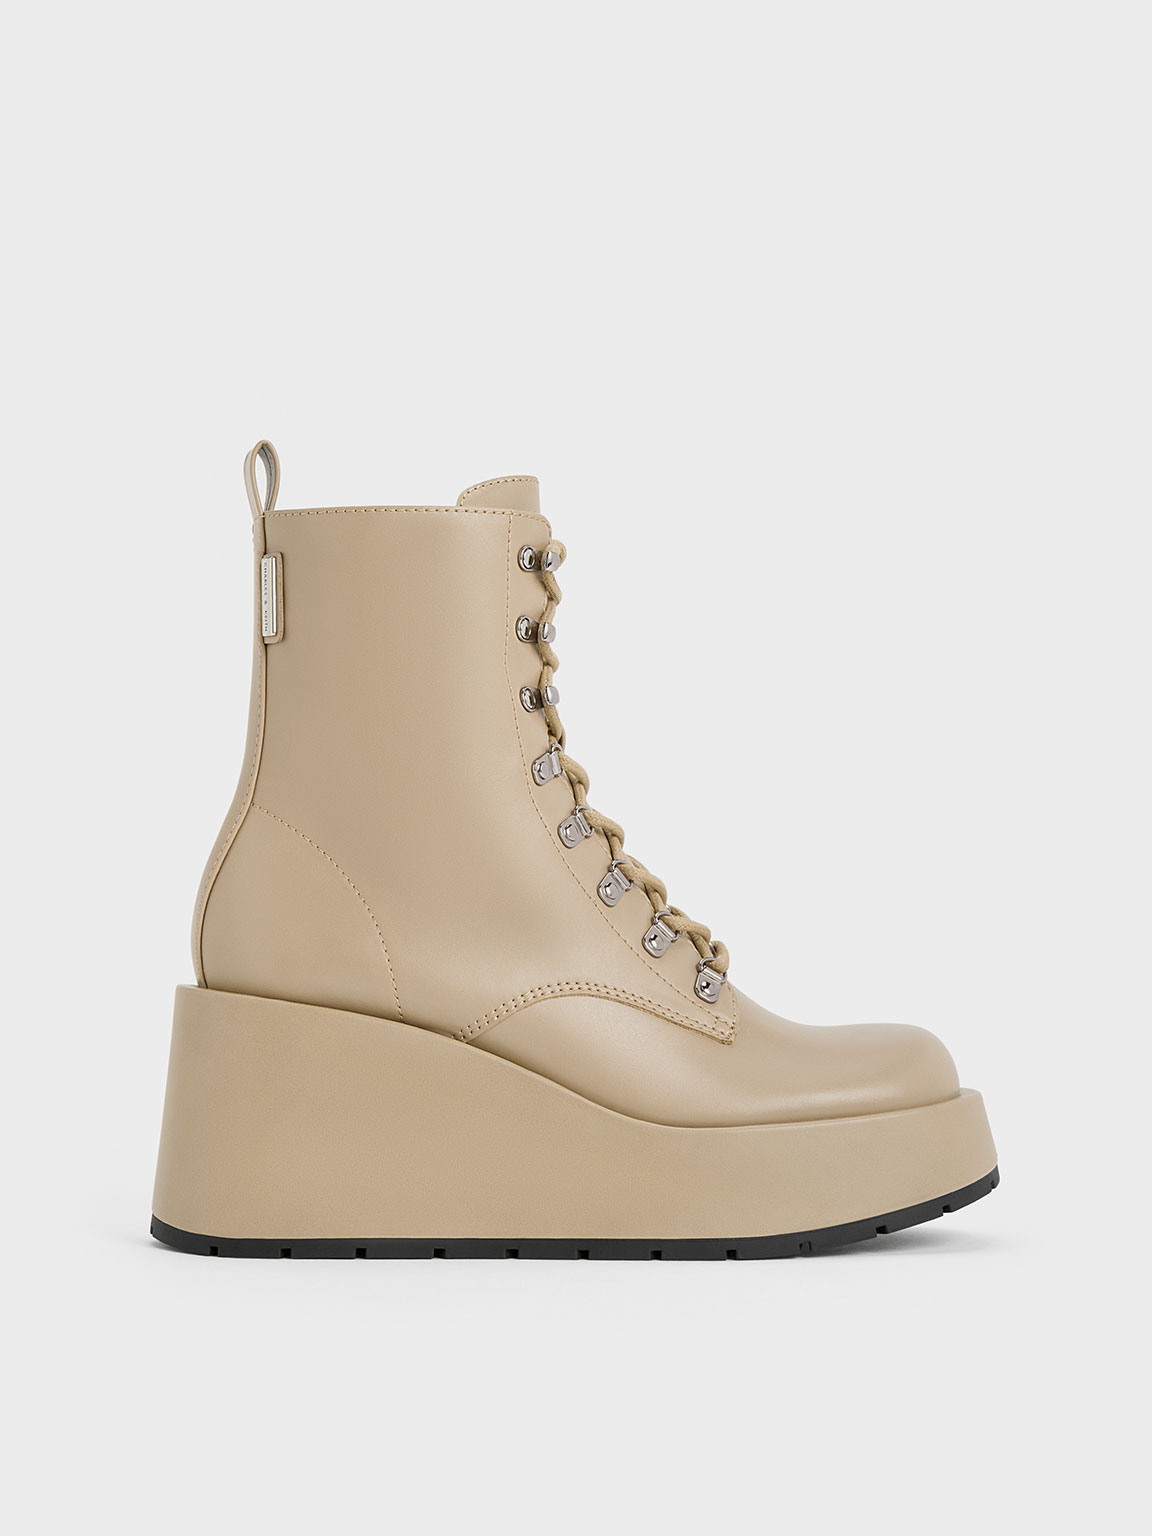 Taupe Lace-Up Platform Wedge Ankle Boots - CHARLES & KEITH TH